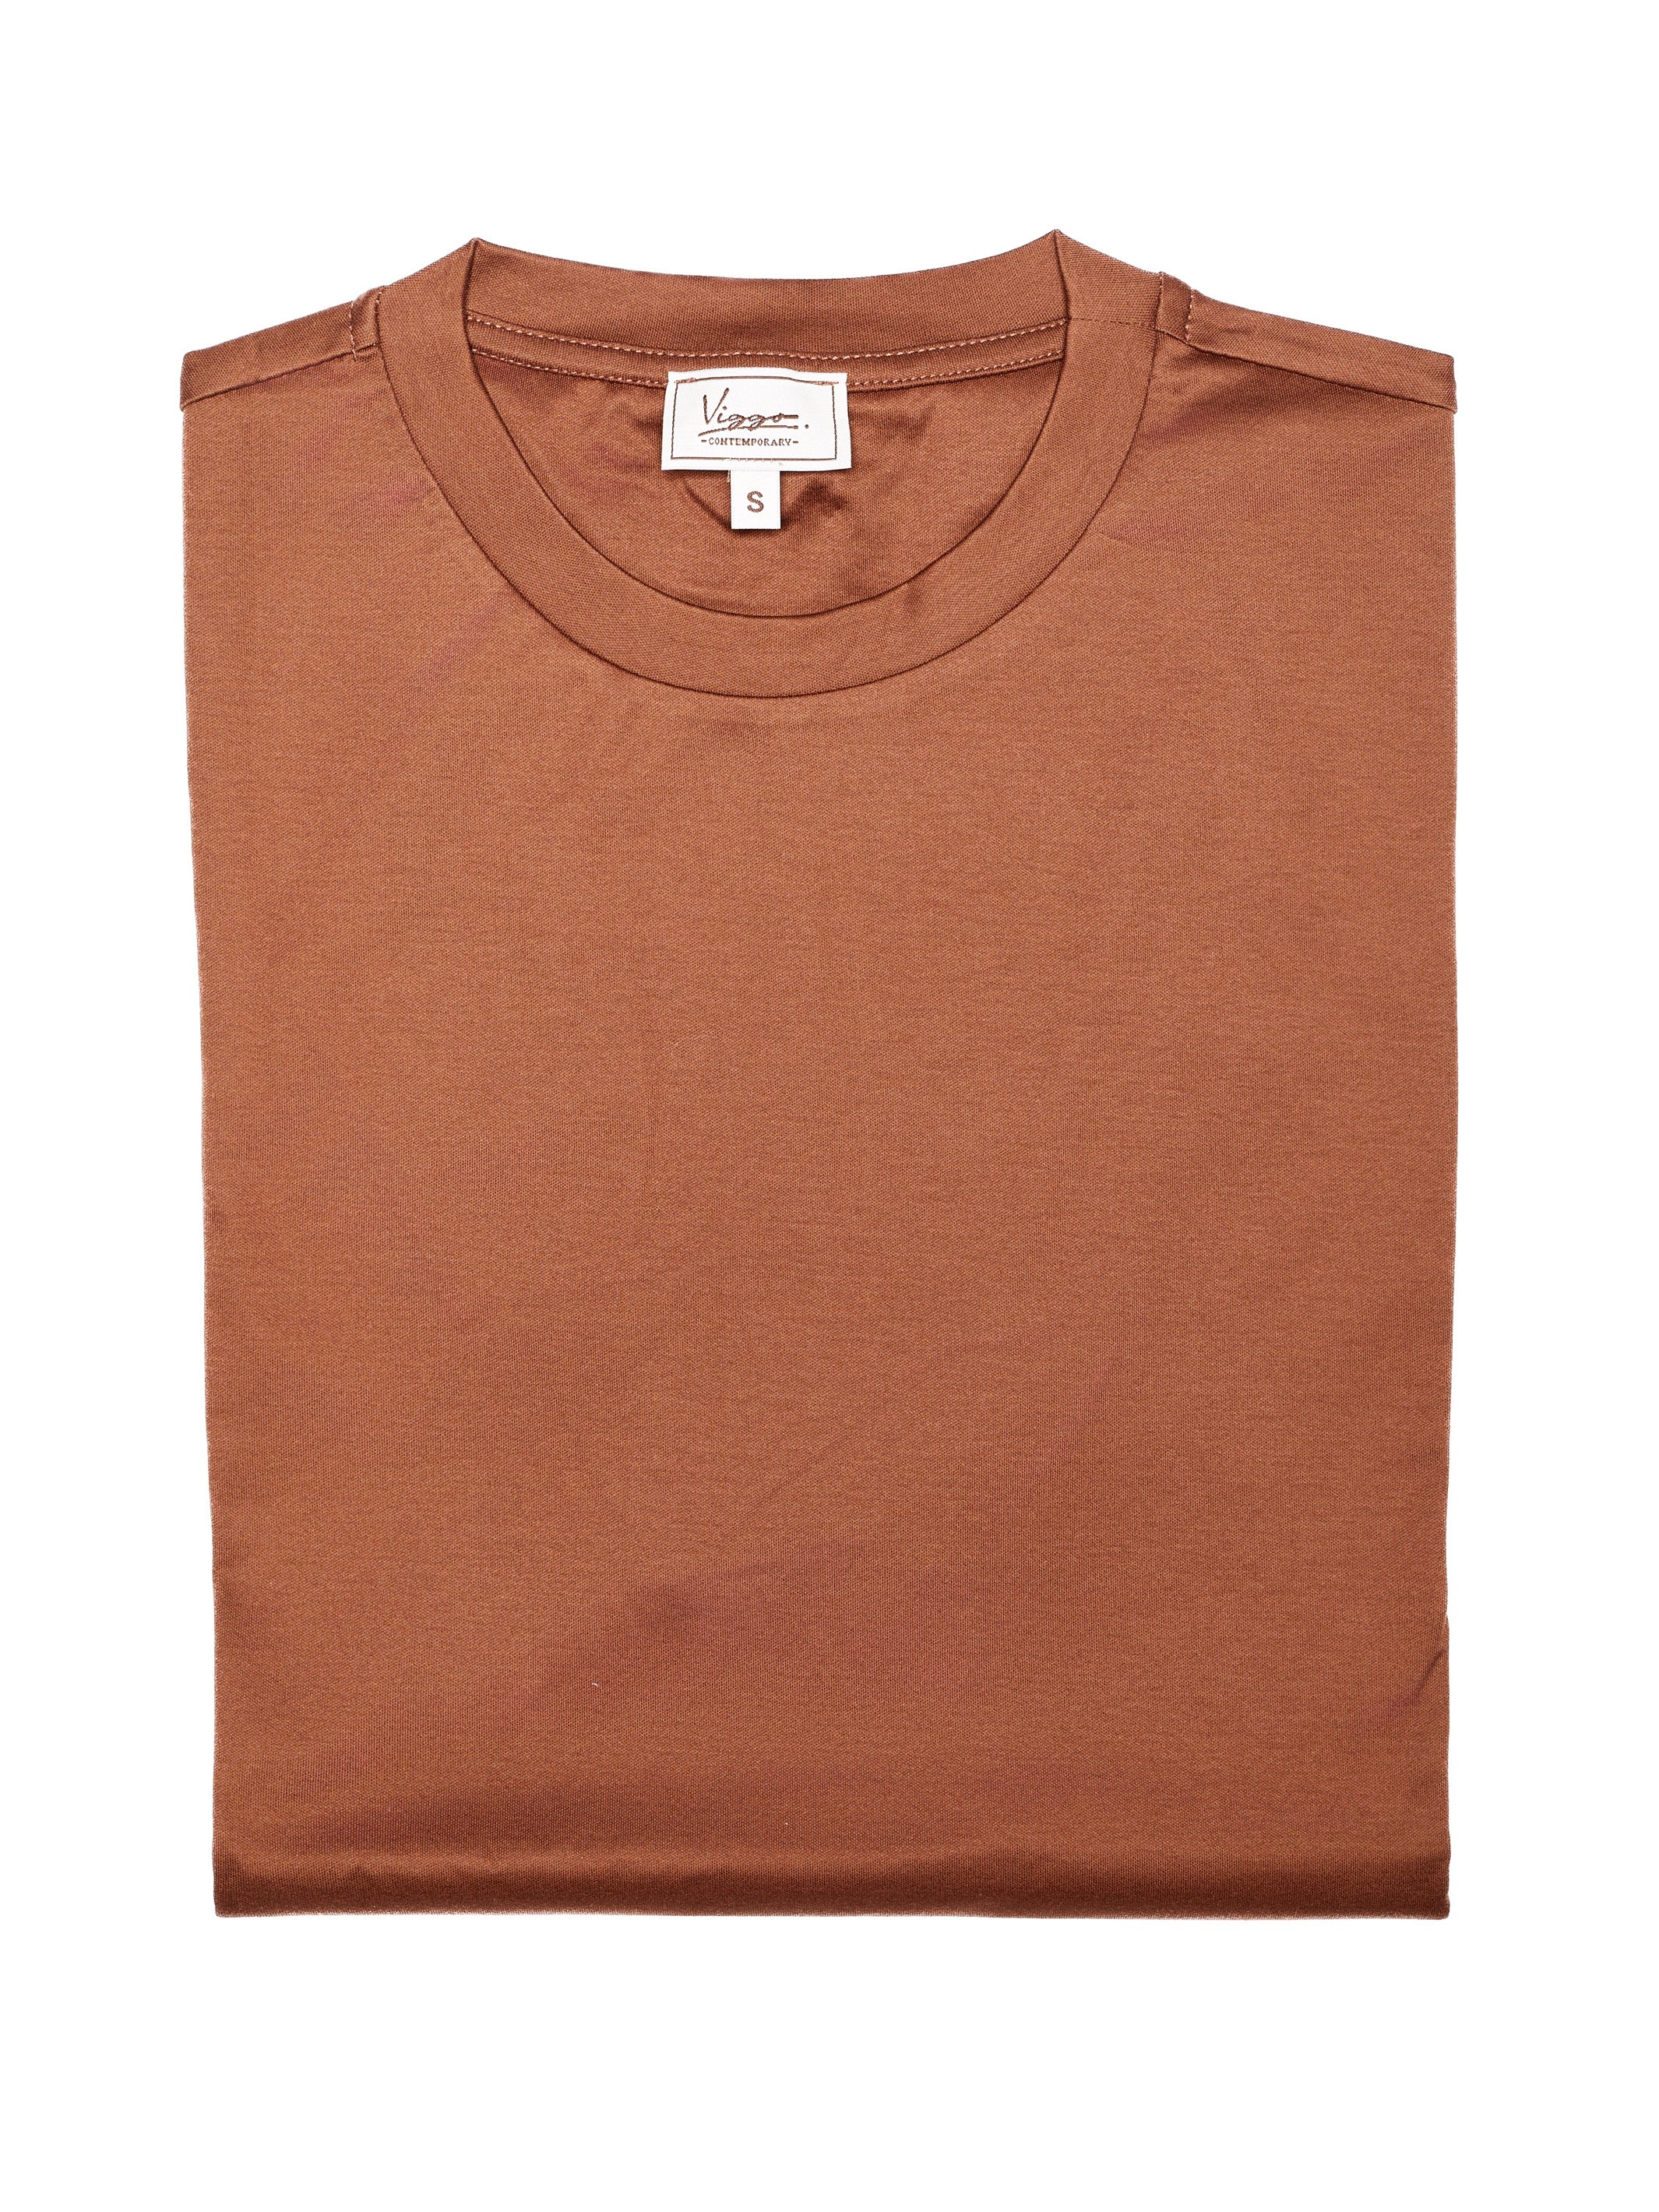 Cotton camel t-shirt with octagon